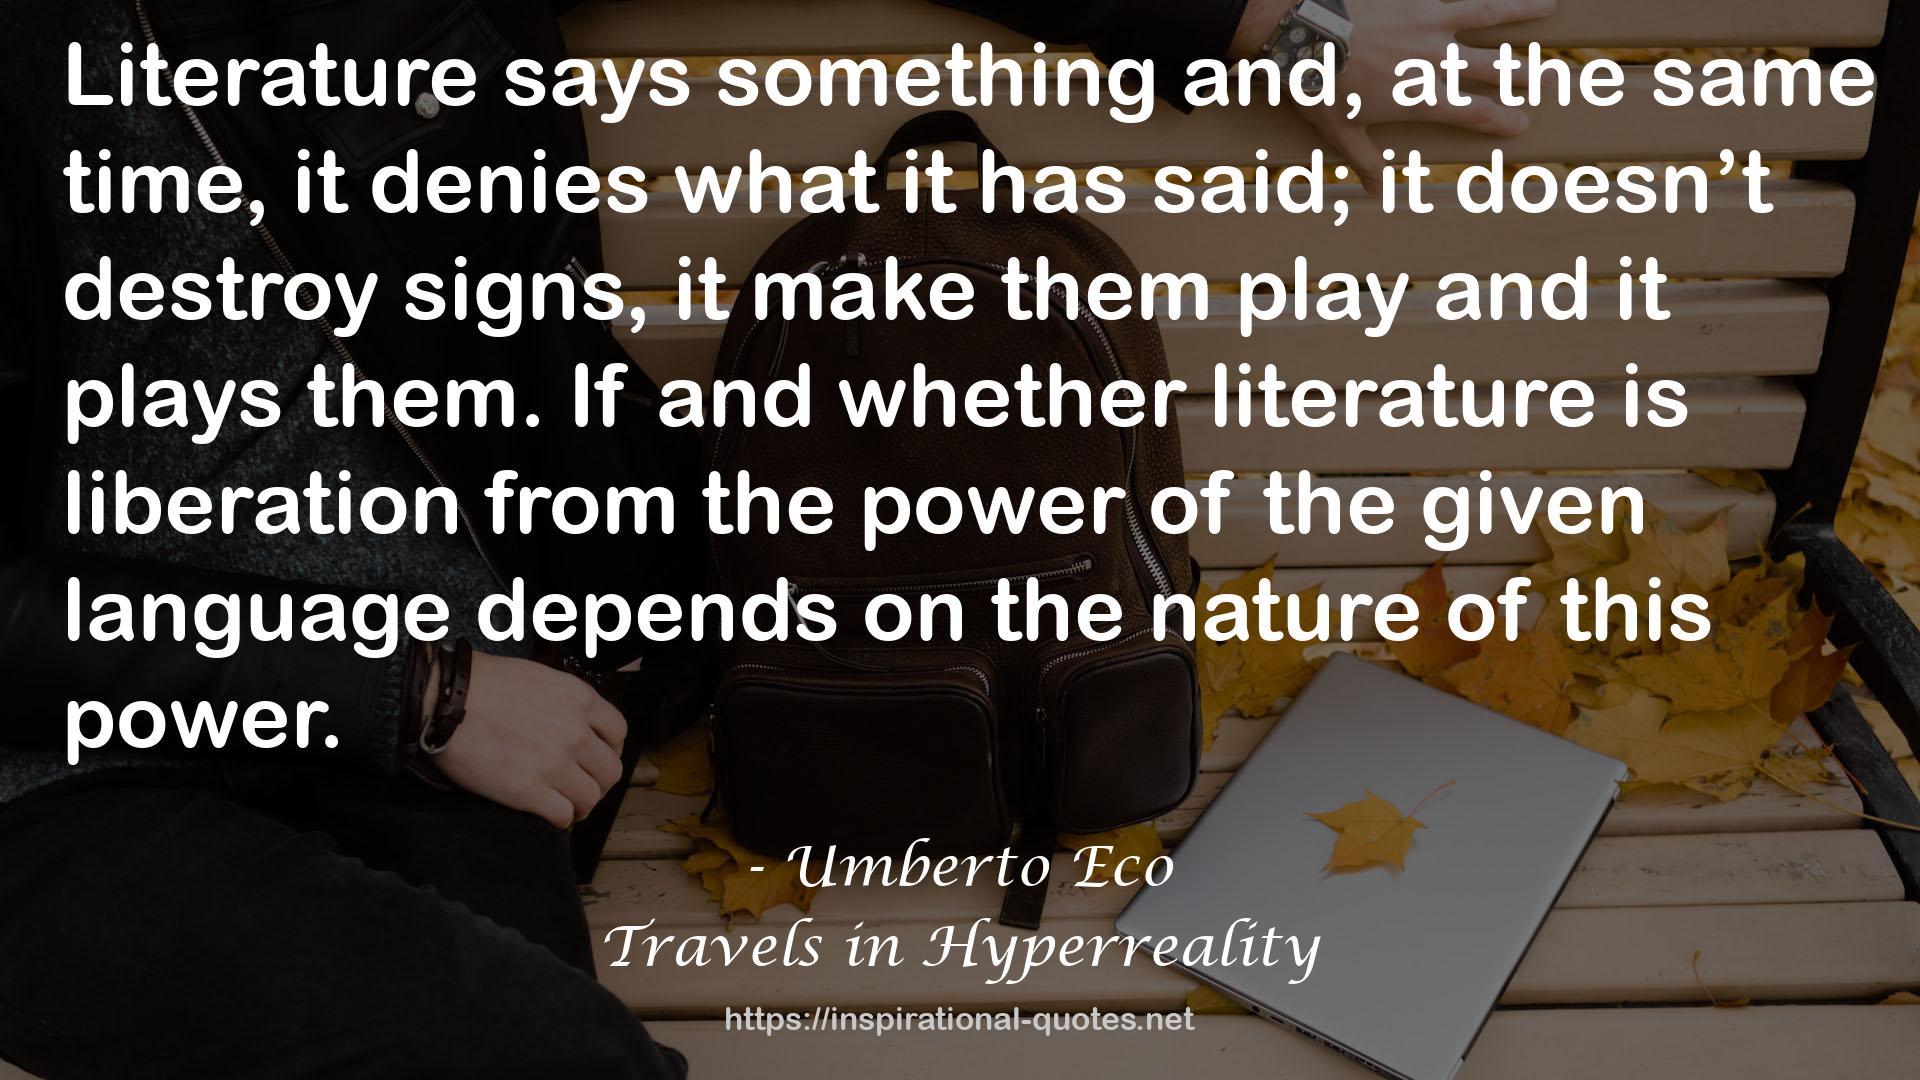 Travels in Hyperreality QUOTES